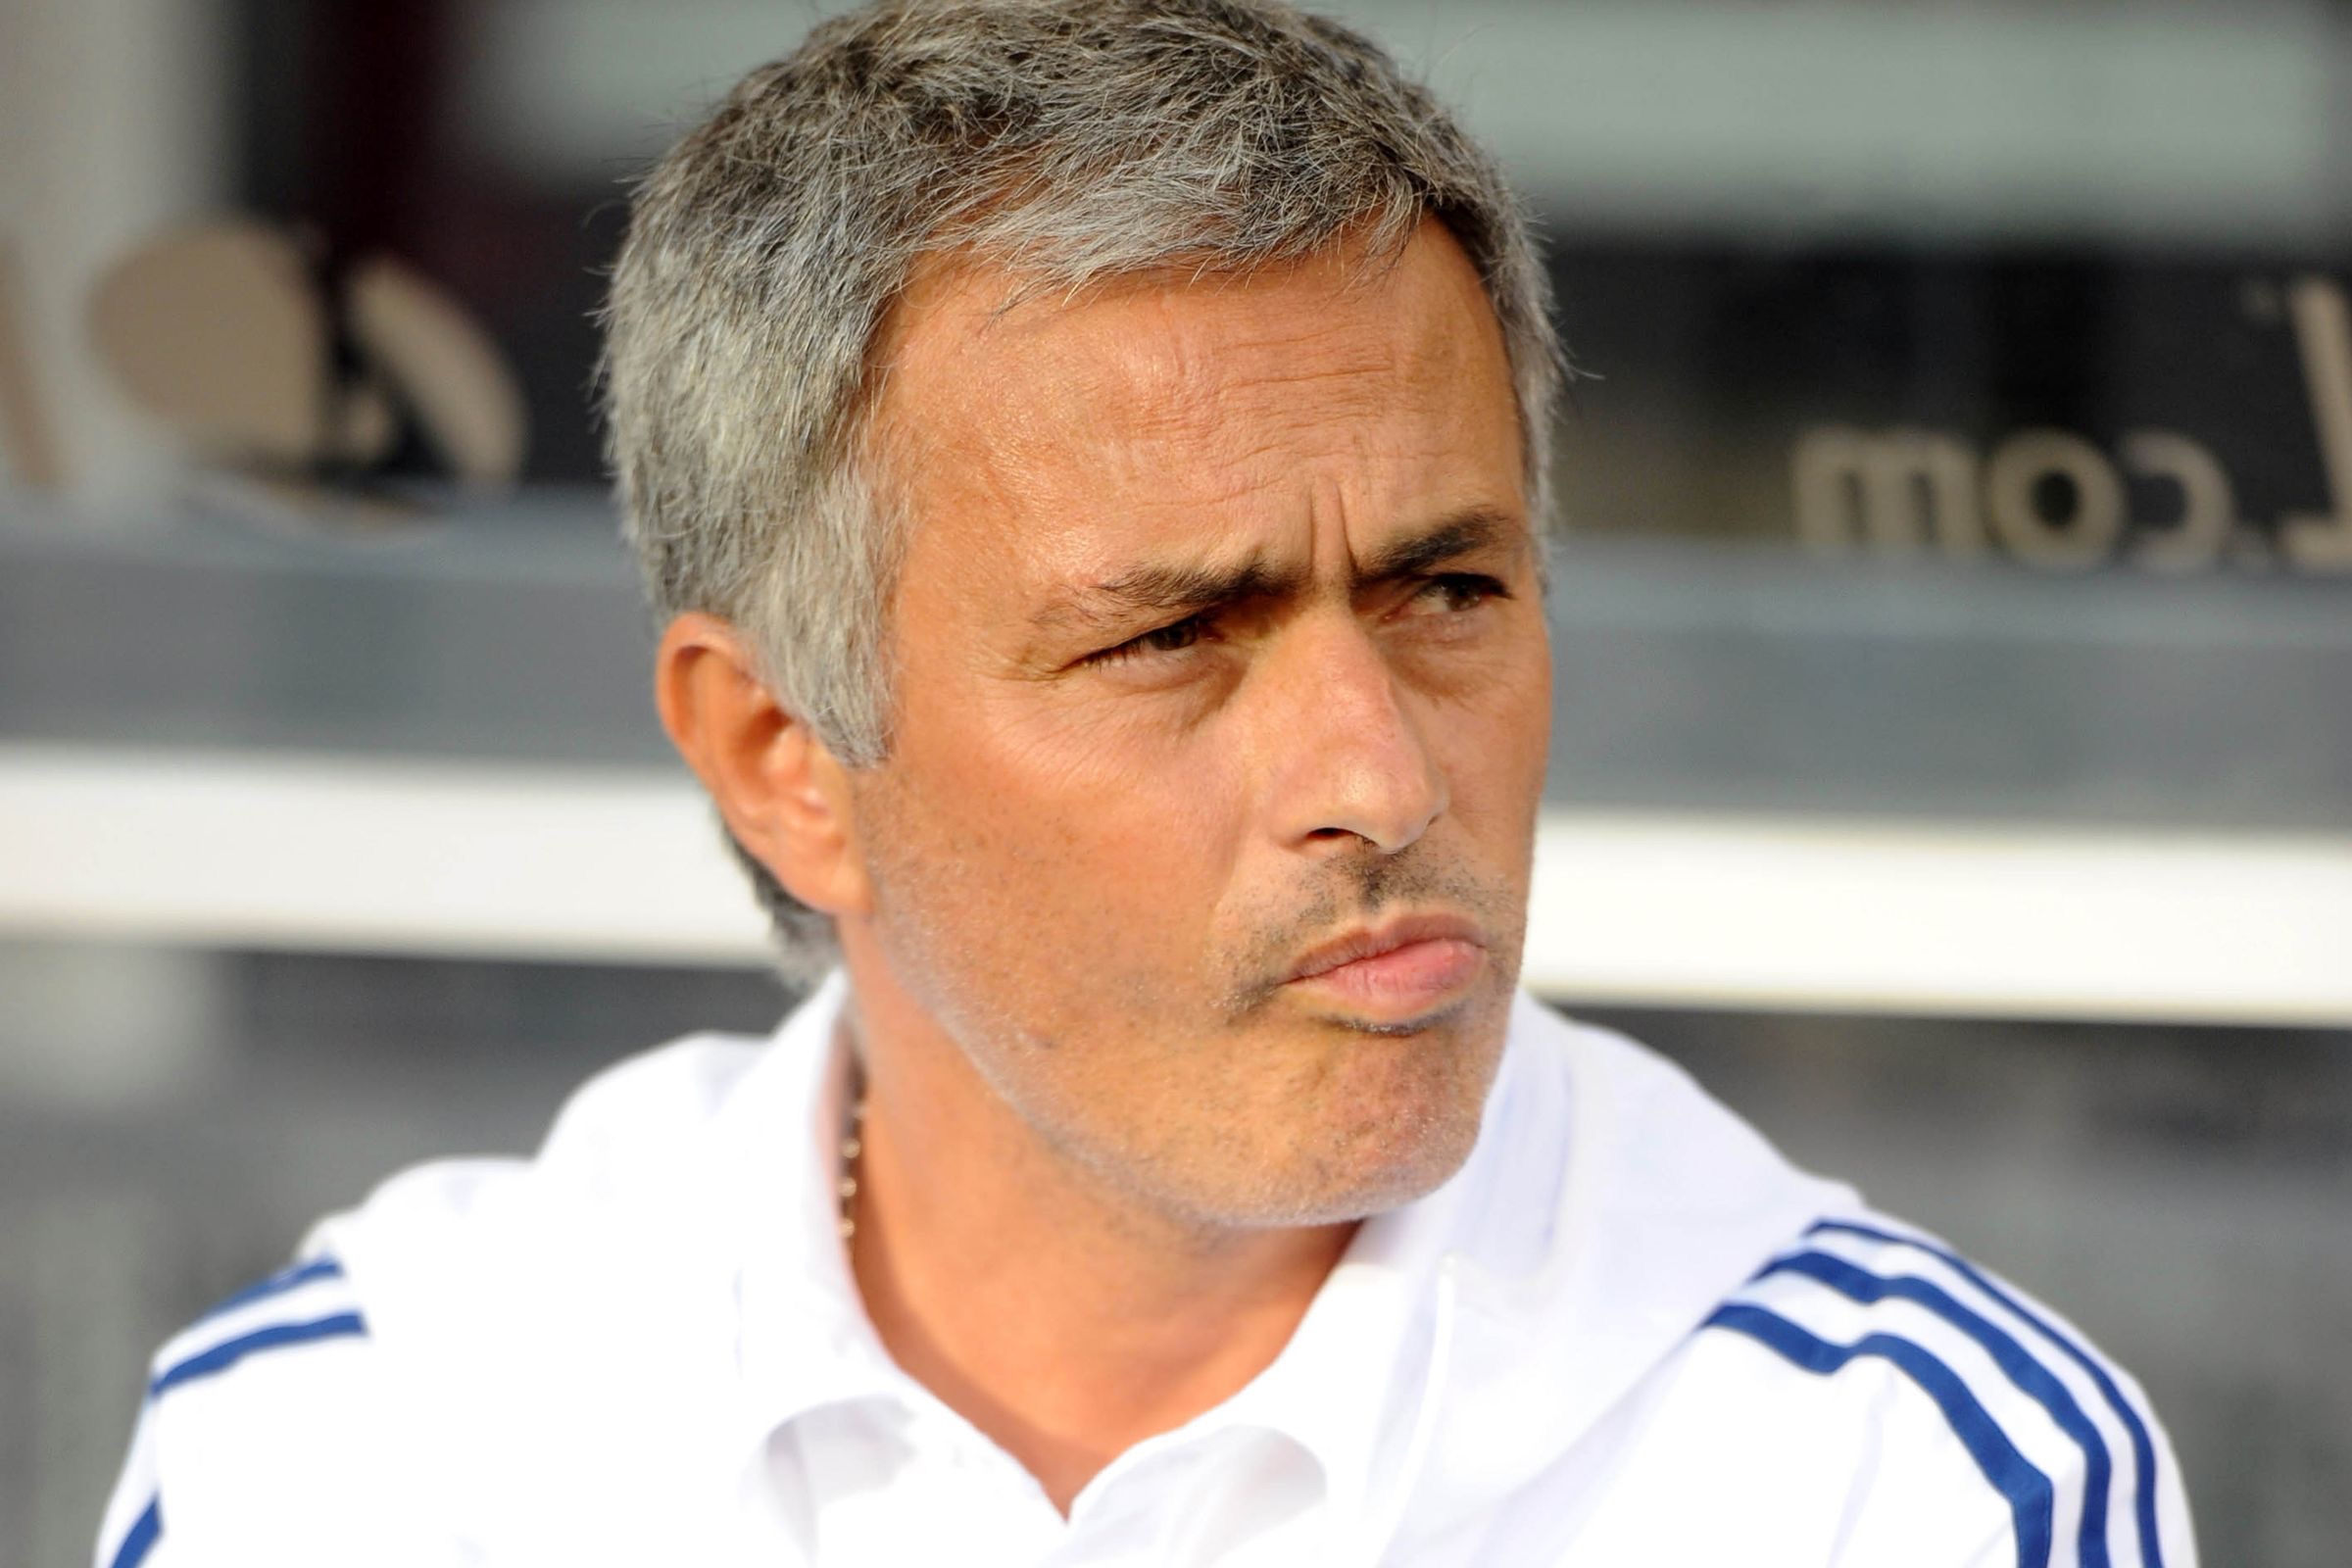 Mourinho might have just stumbled on a solution to Chelsea's problems